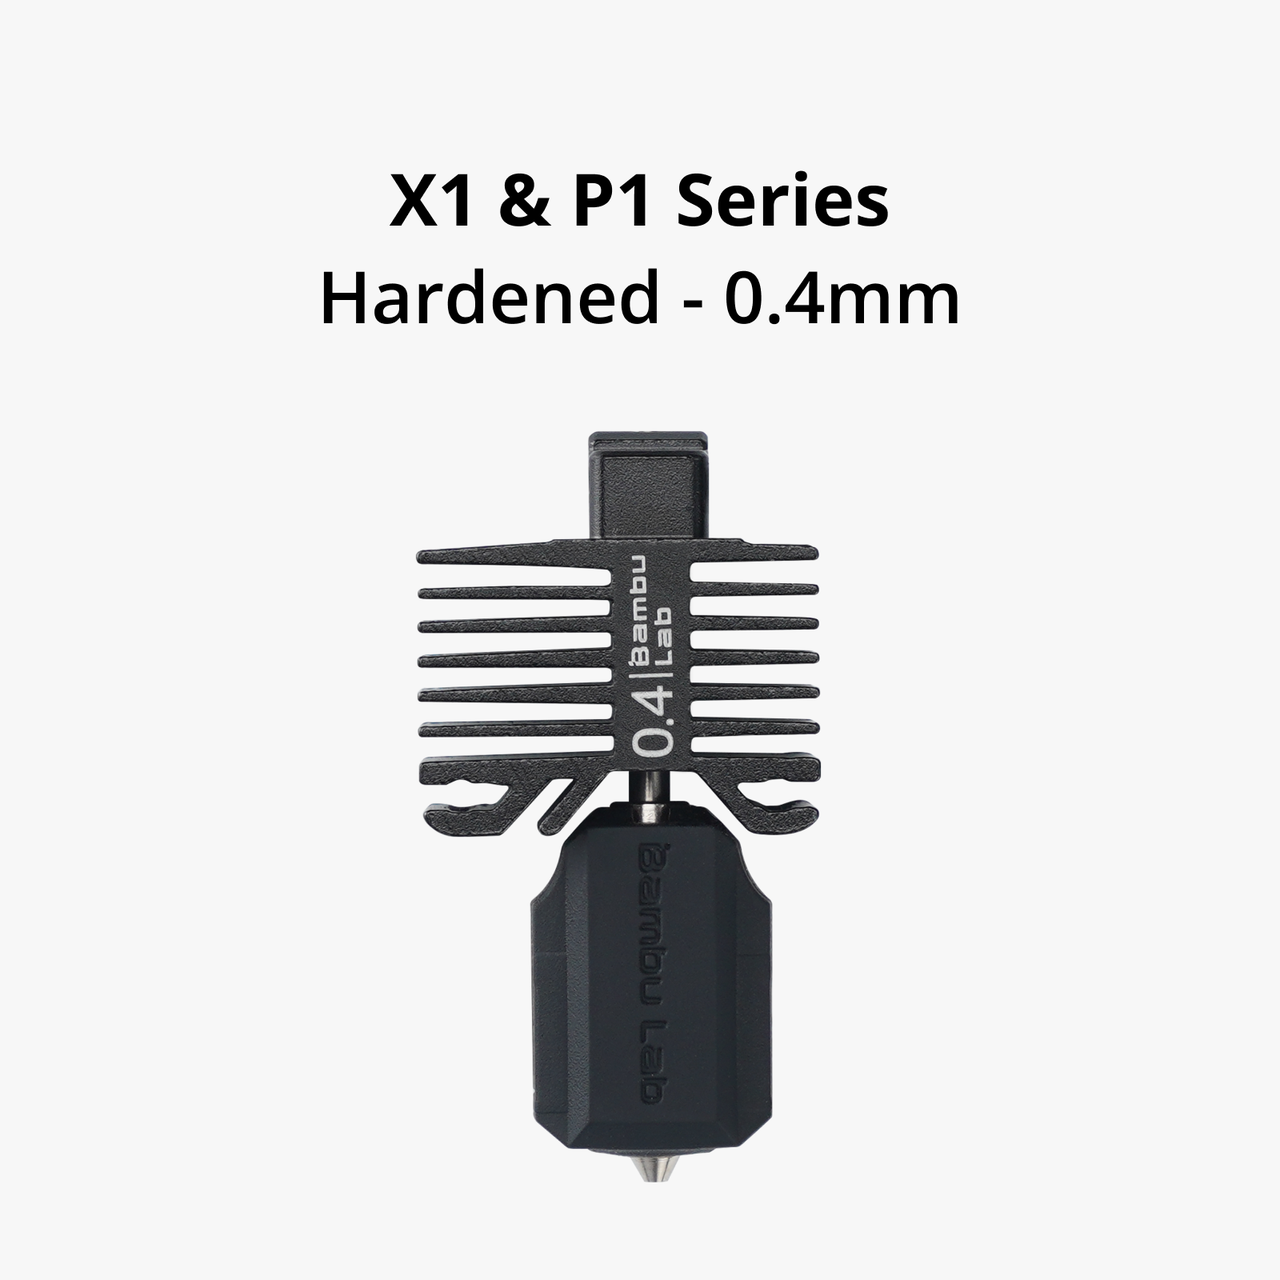 Hotend with hardened steel nozzle- 0.4 mm